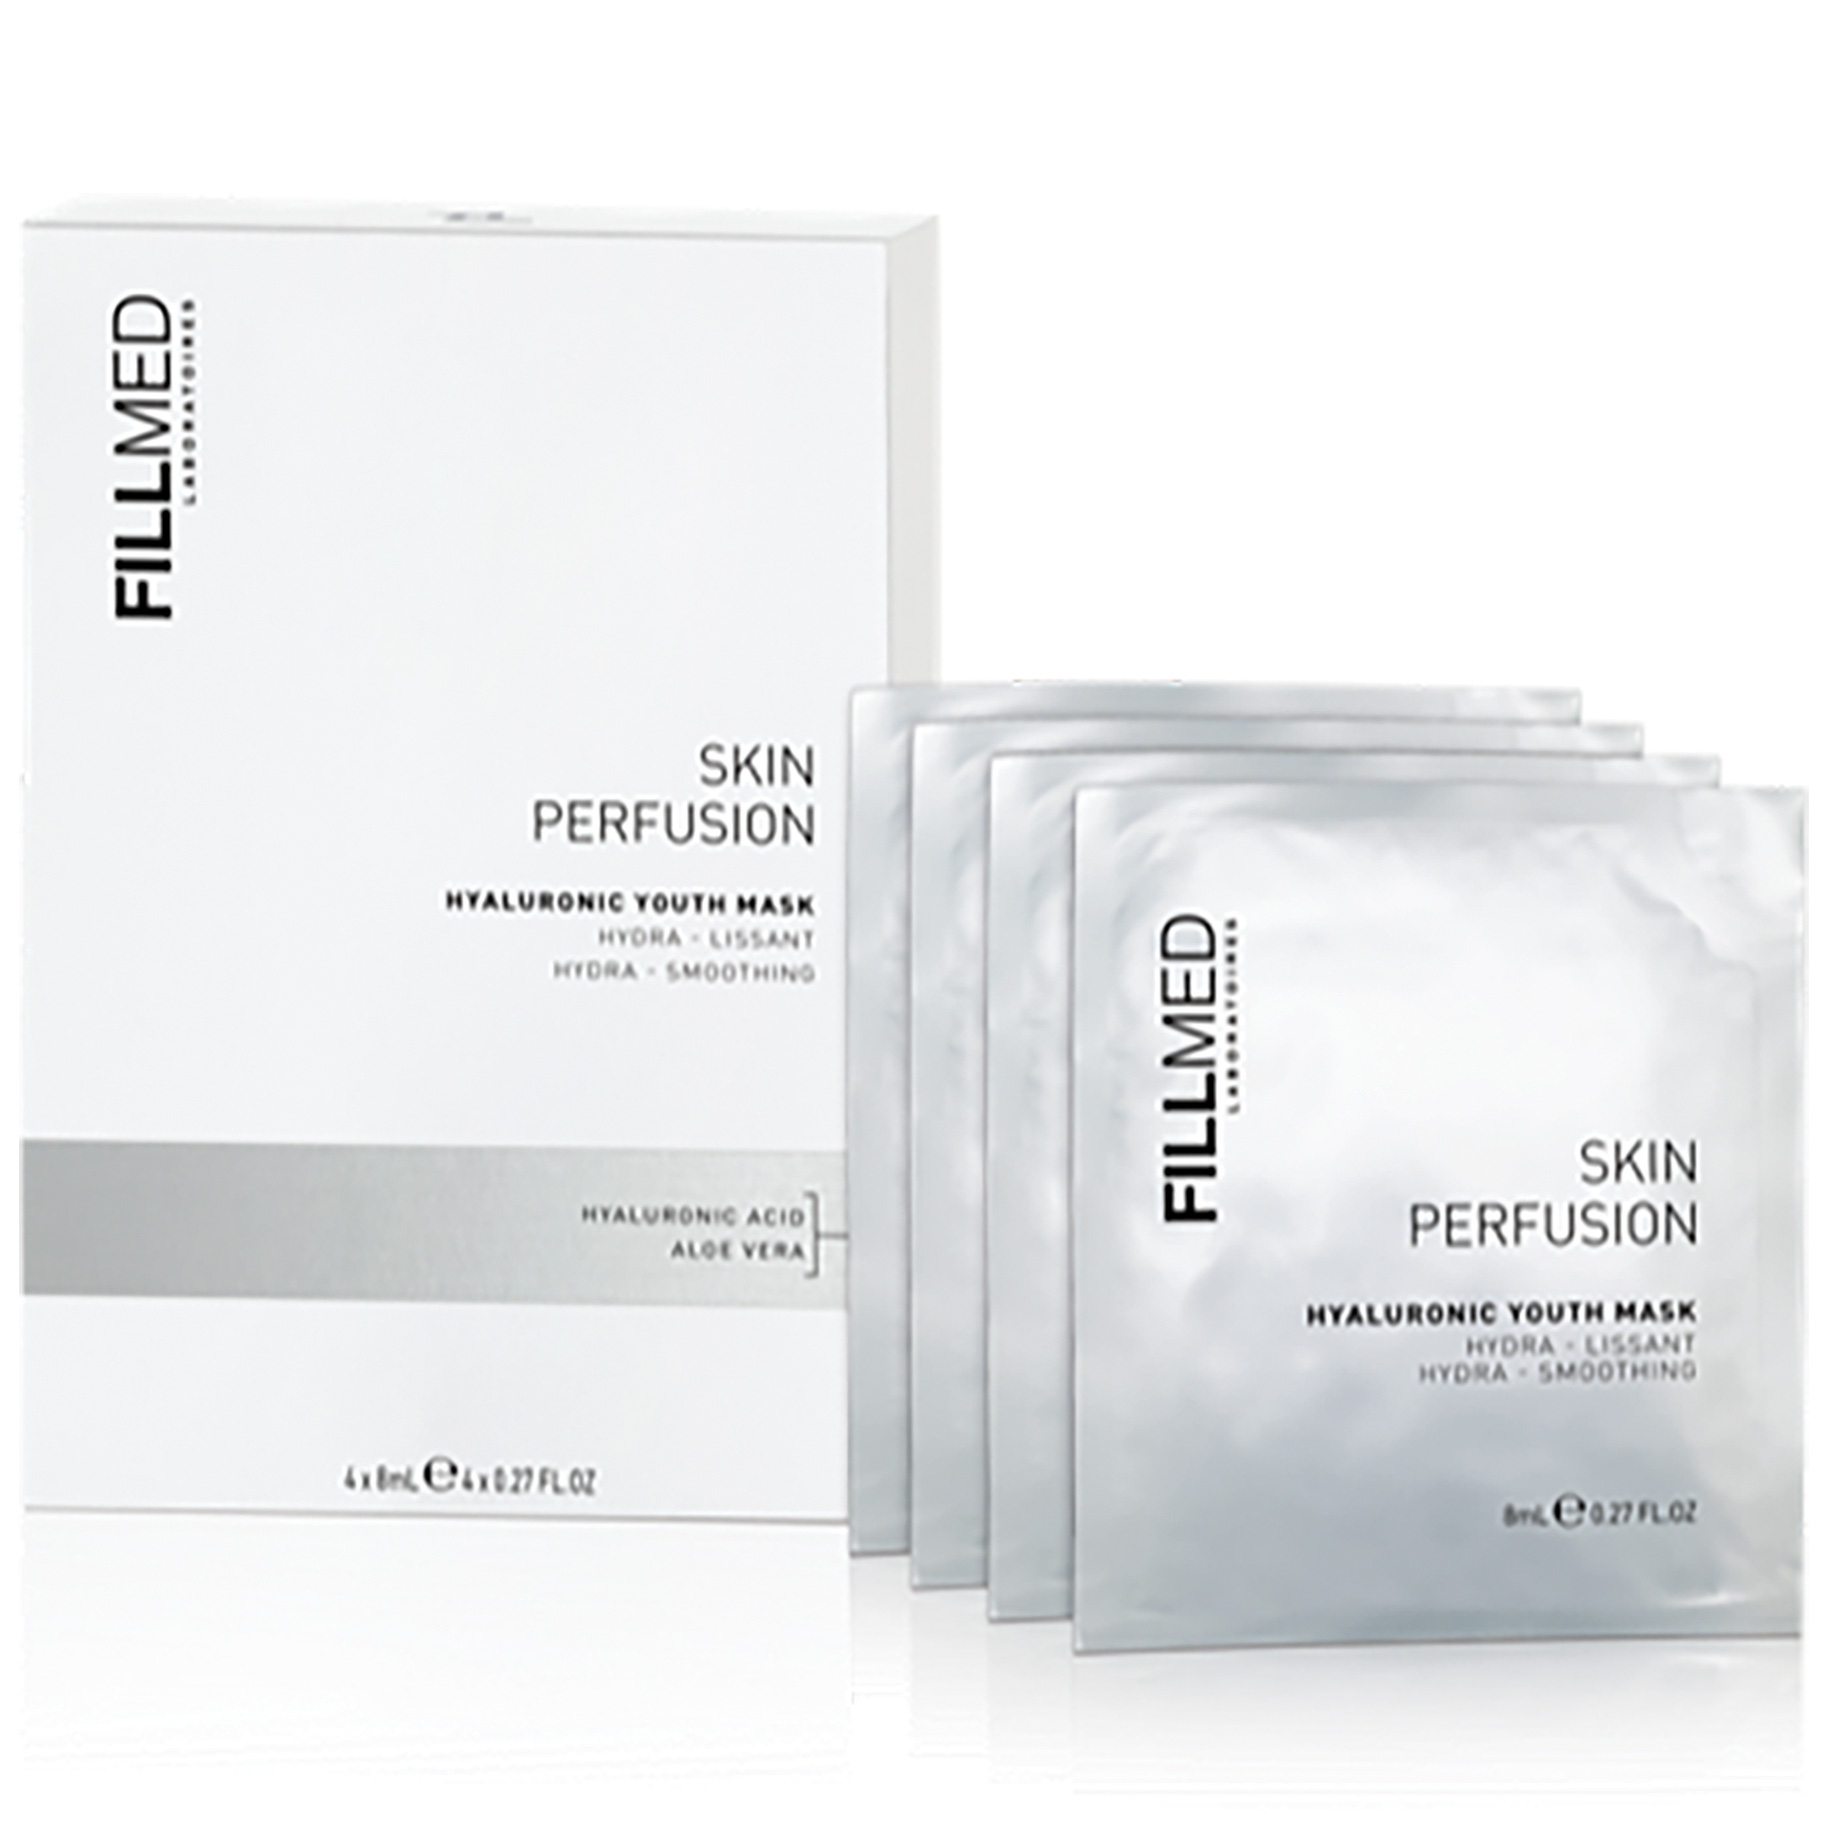 Fillmed Skin Perfusion Hyaluronic Youth Mask 